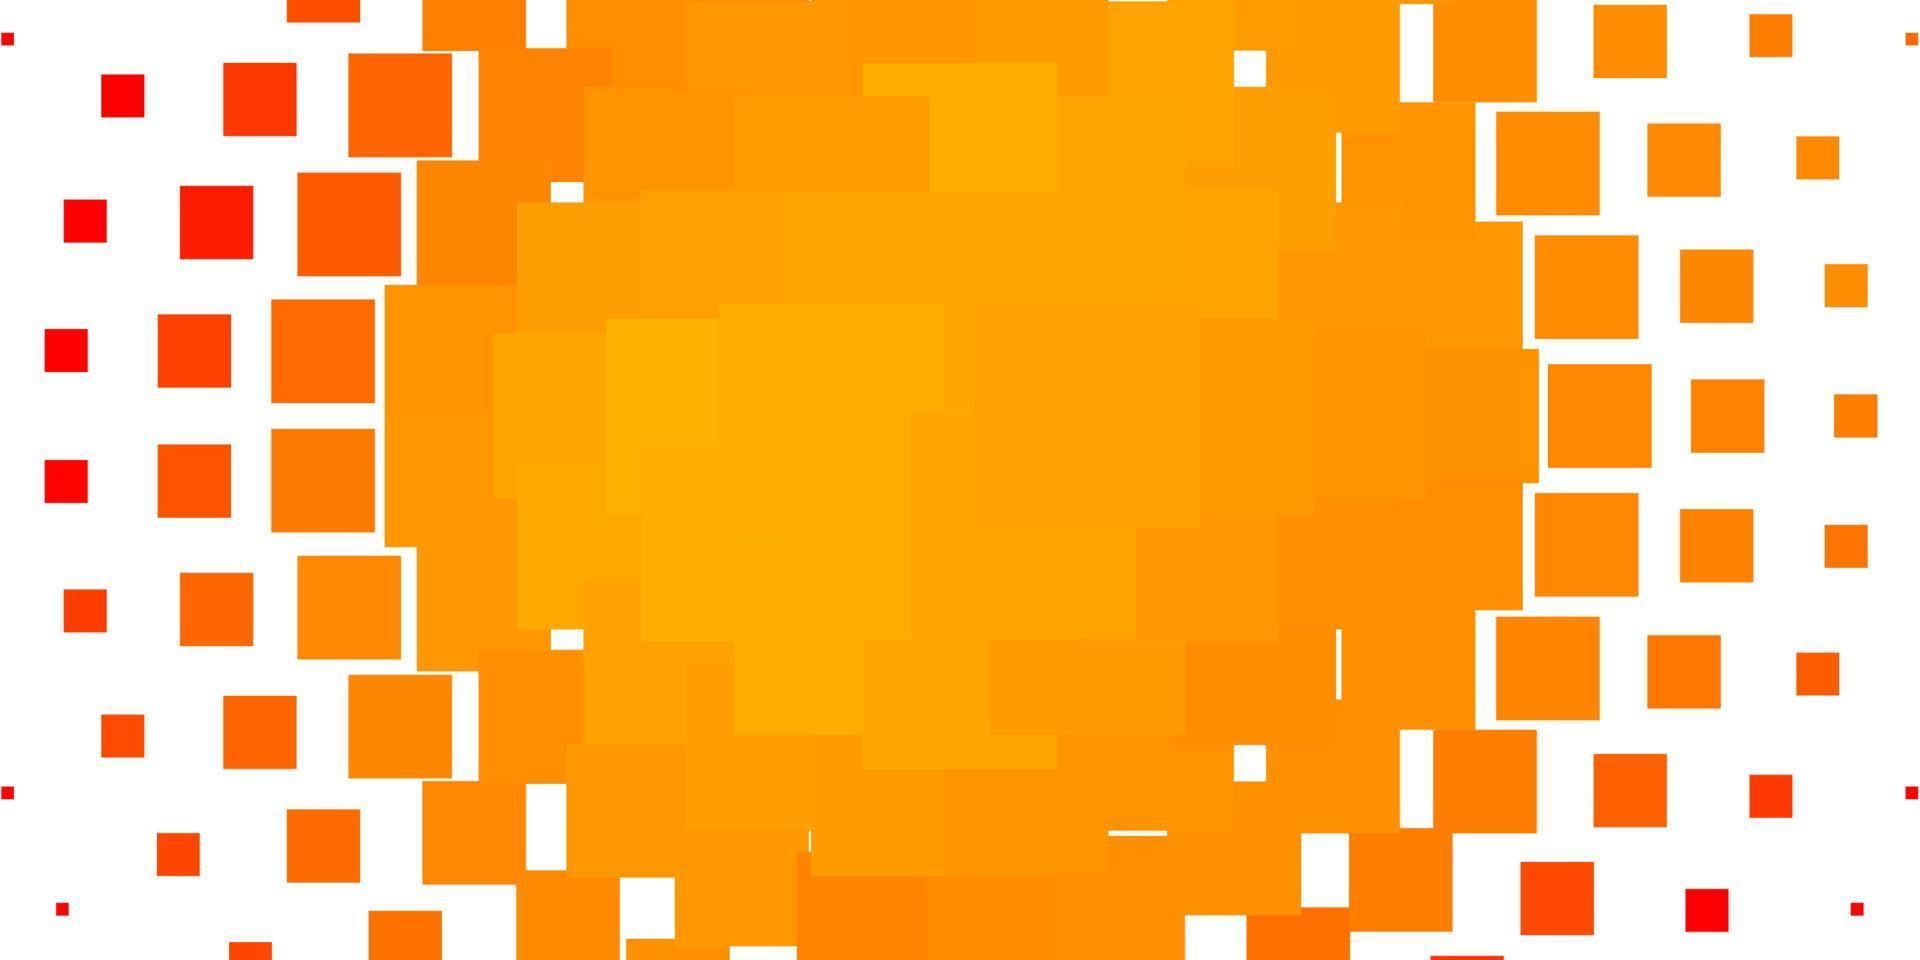 Light Orange vector layout with lines, rectangles.